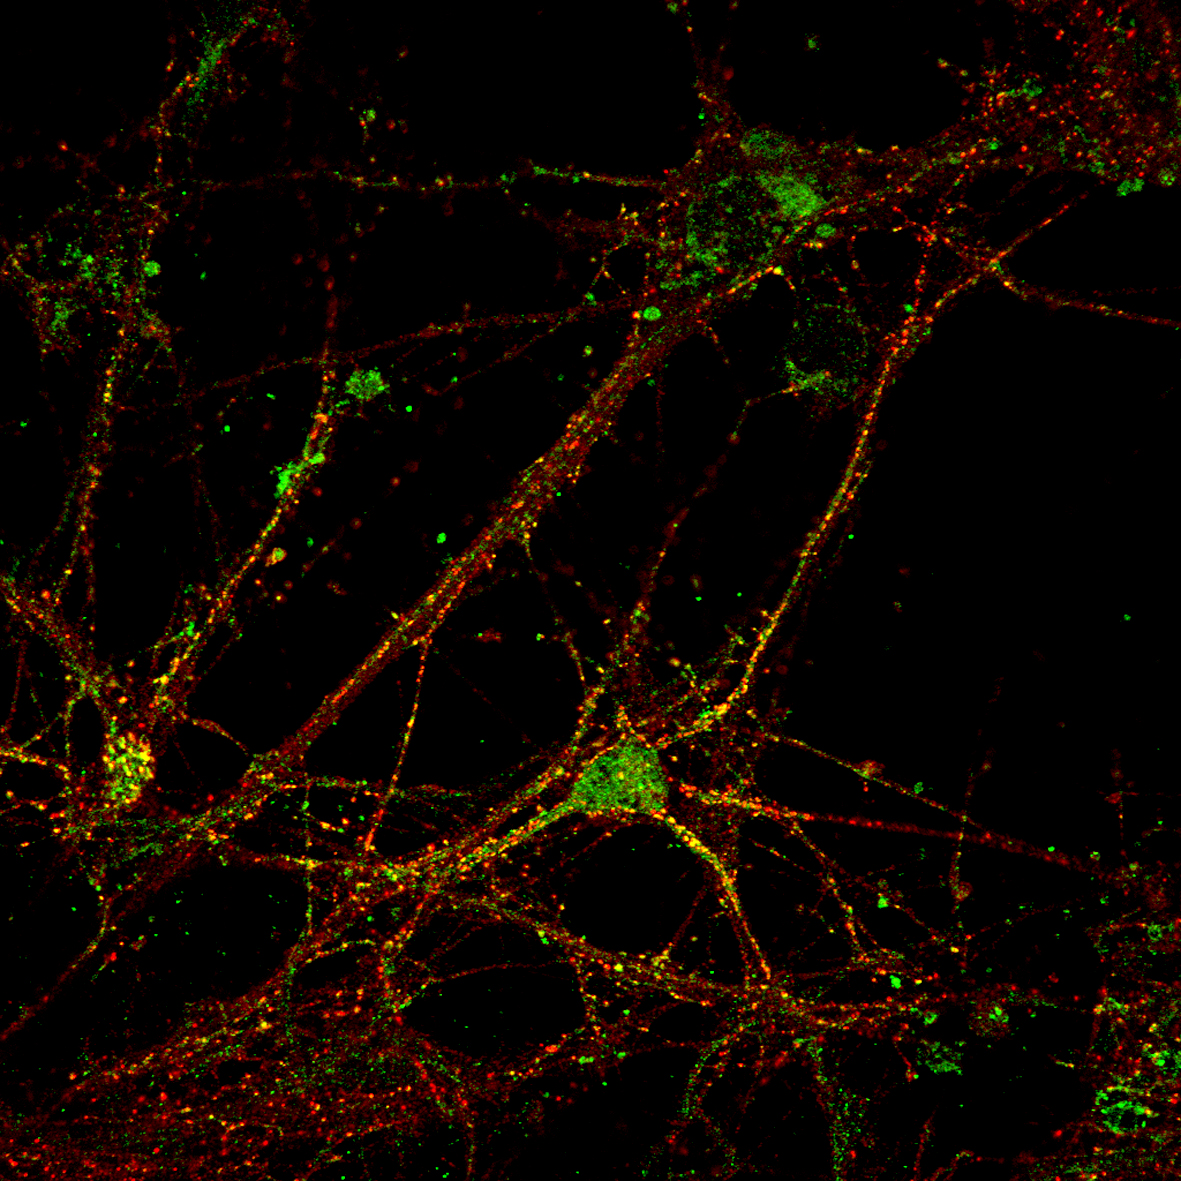 SIM image of hippocampal mouse neuron. NR1 subunit of the NMDA receptor labeled with ATTO 532 and Homer labeled with ATTO 647N.